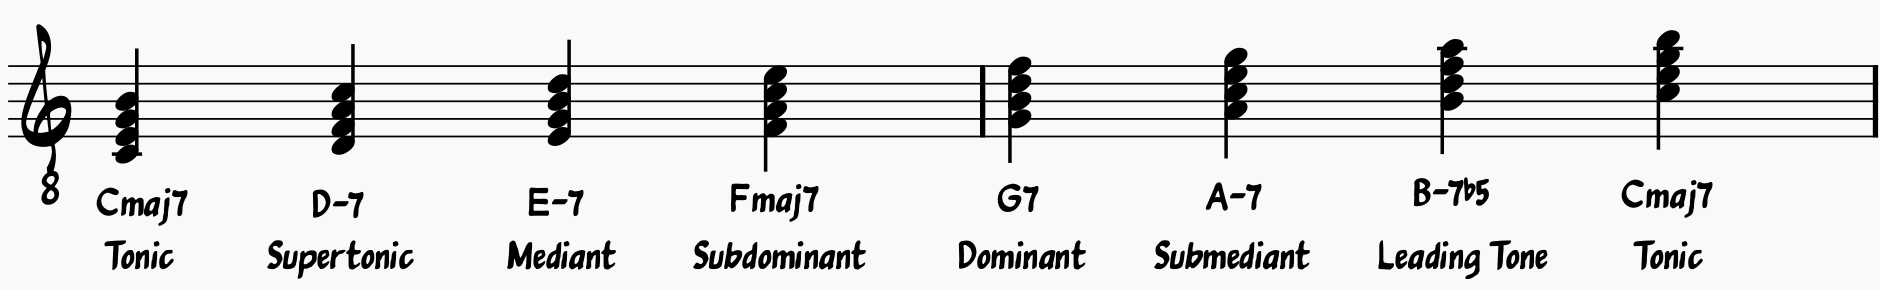 Diatonic Chord Scale in the Key of C